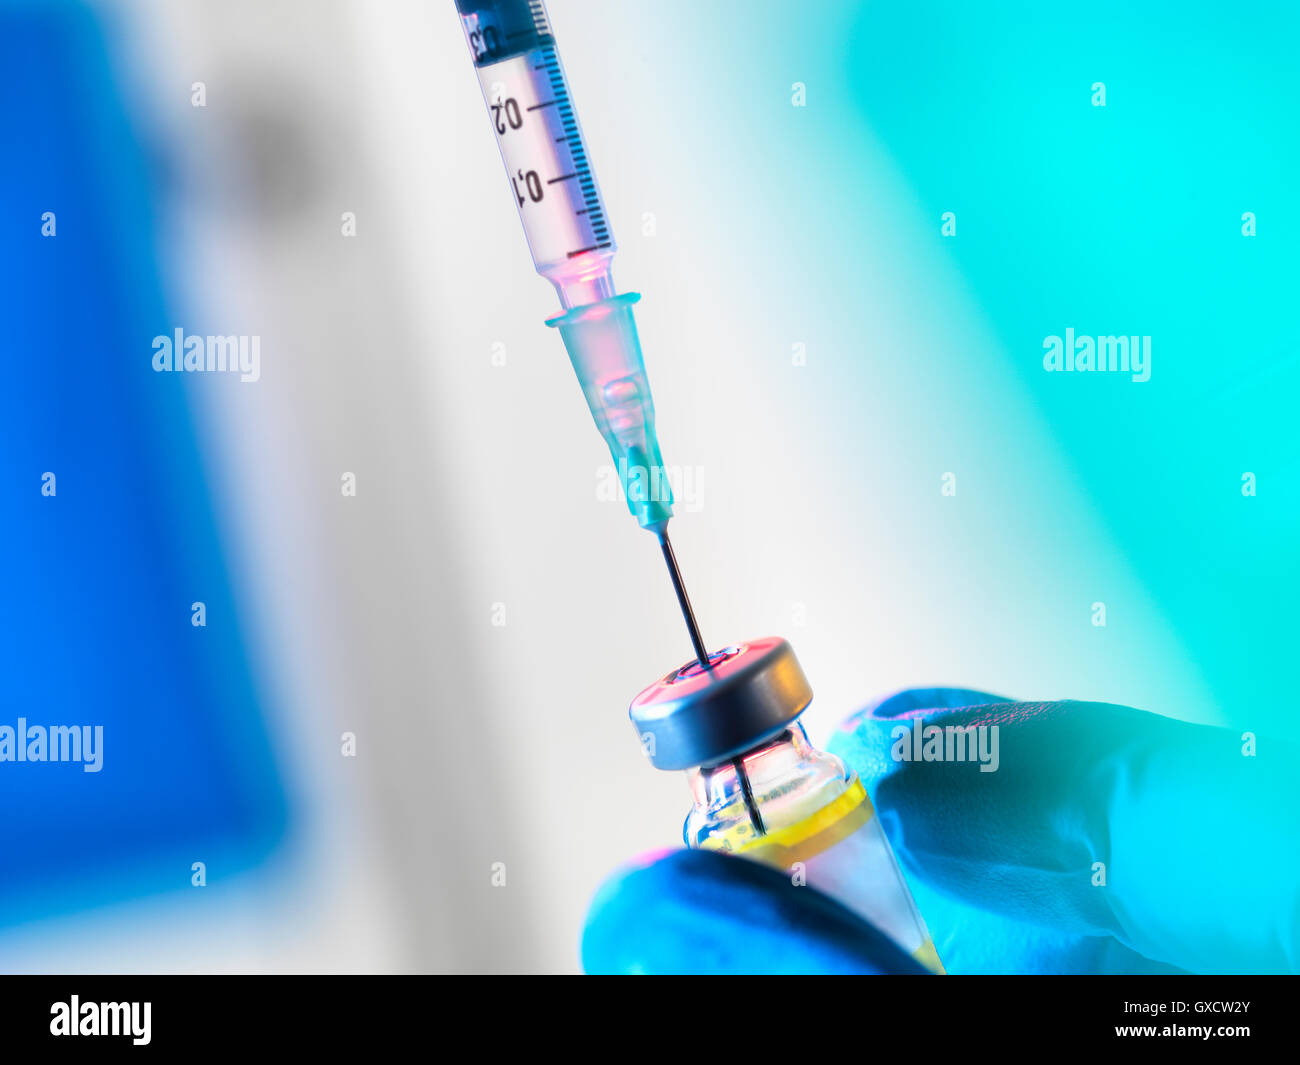 Syringe inserted into a vaccine vial Stock Photo